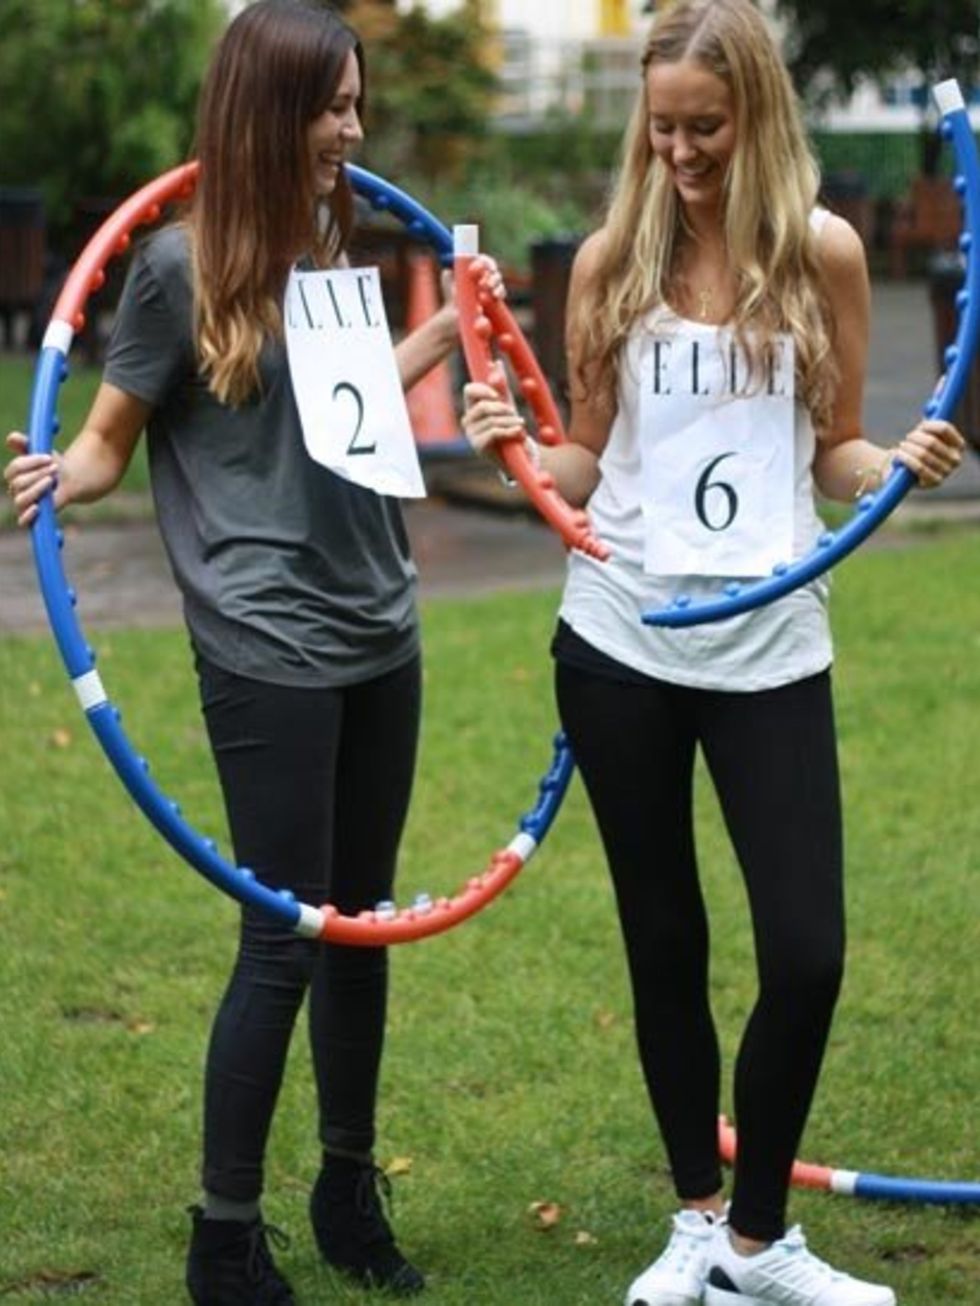 <p>We learnt a couple of valuable lessons in the hula-off between Acting Picture Editor Nikki (2) and Beauty Intern Joely (6): one, make sure your hula-hoop is properly assembled. And two, hula-hooping in wedges is a <em>bad </em>idea. Not surprisingly 